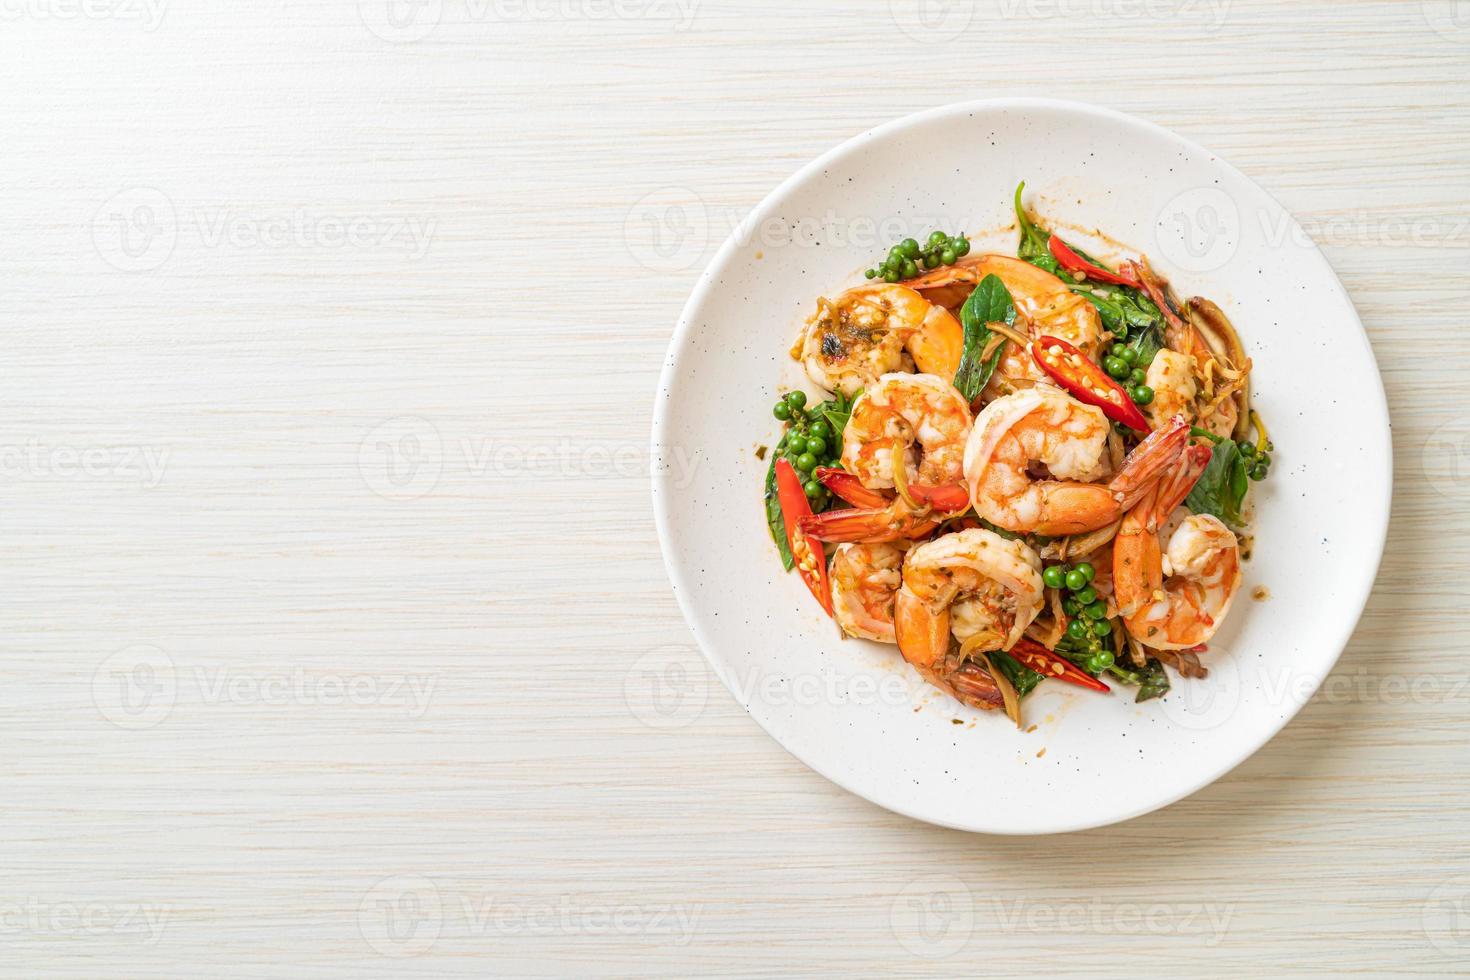 Stir-fried holy basil with shrimps and herb - Asian food style photo